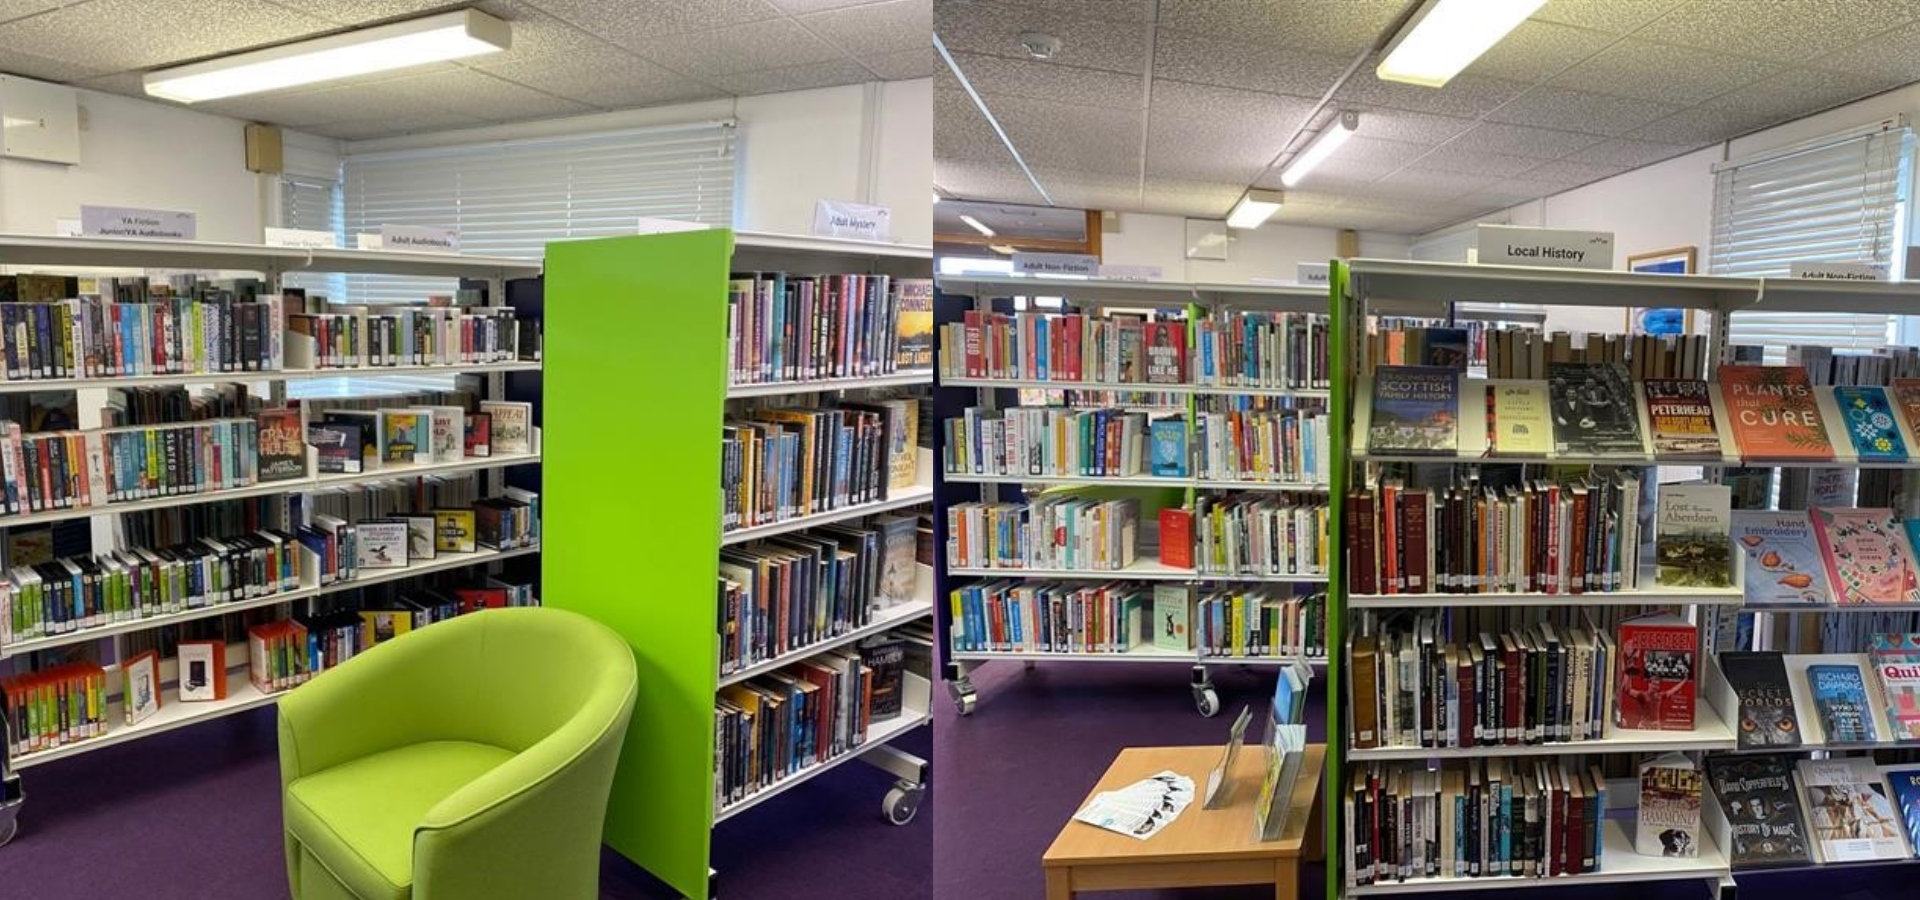 The inside of Oldmeldrum Library